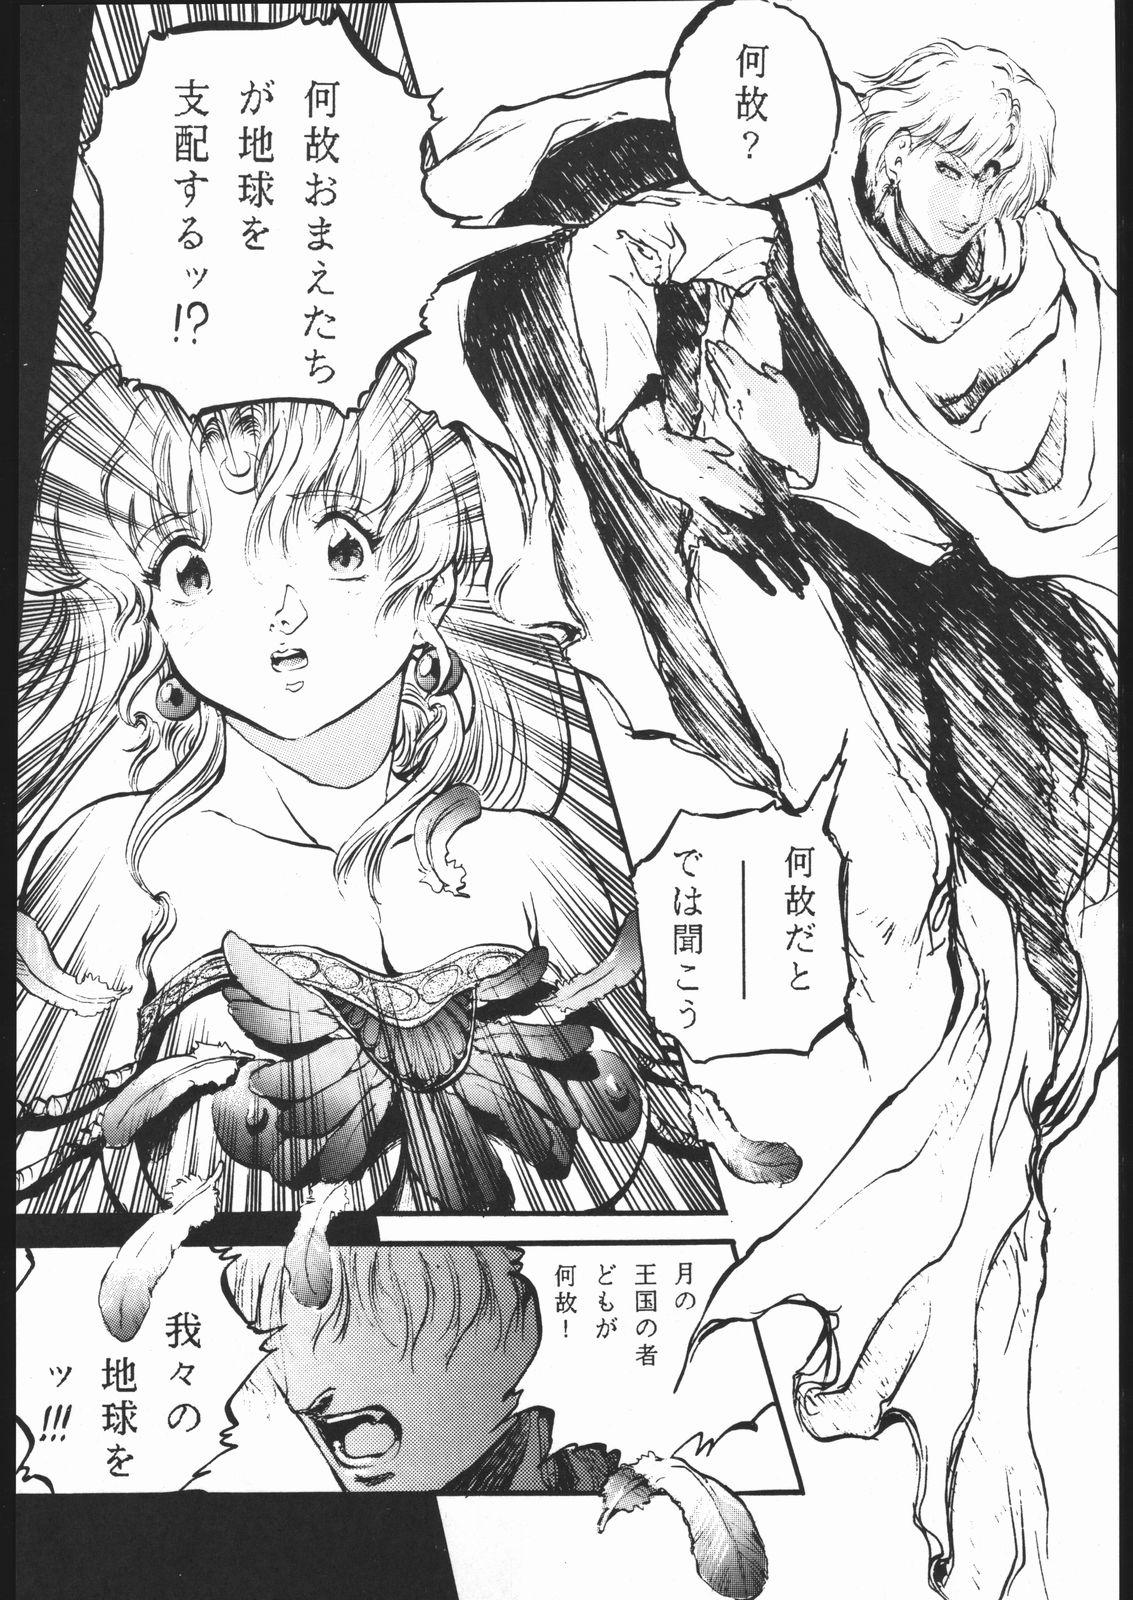 Rough Sex Porn KATZE 8 - Sailor moon Tenchi muyo Ghost sweeper mikami Giant robo Victory gundam Food - Page 7